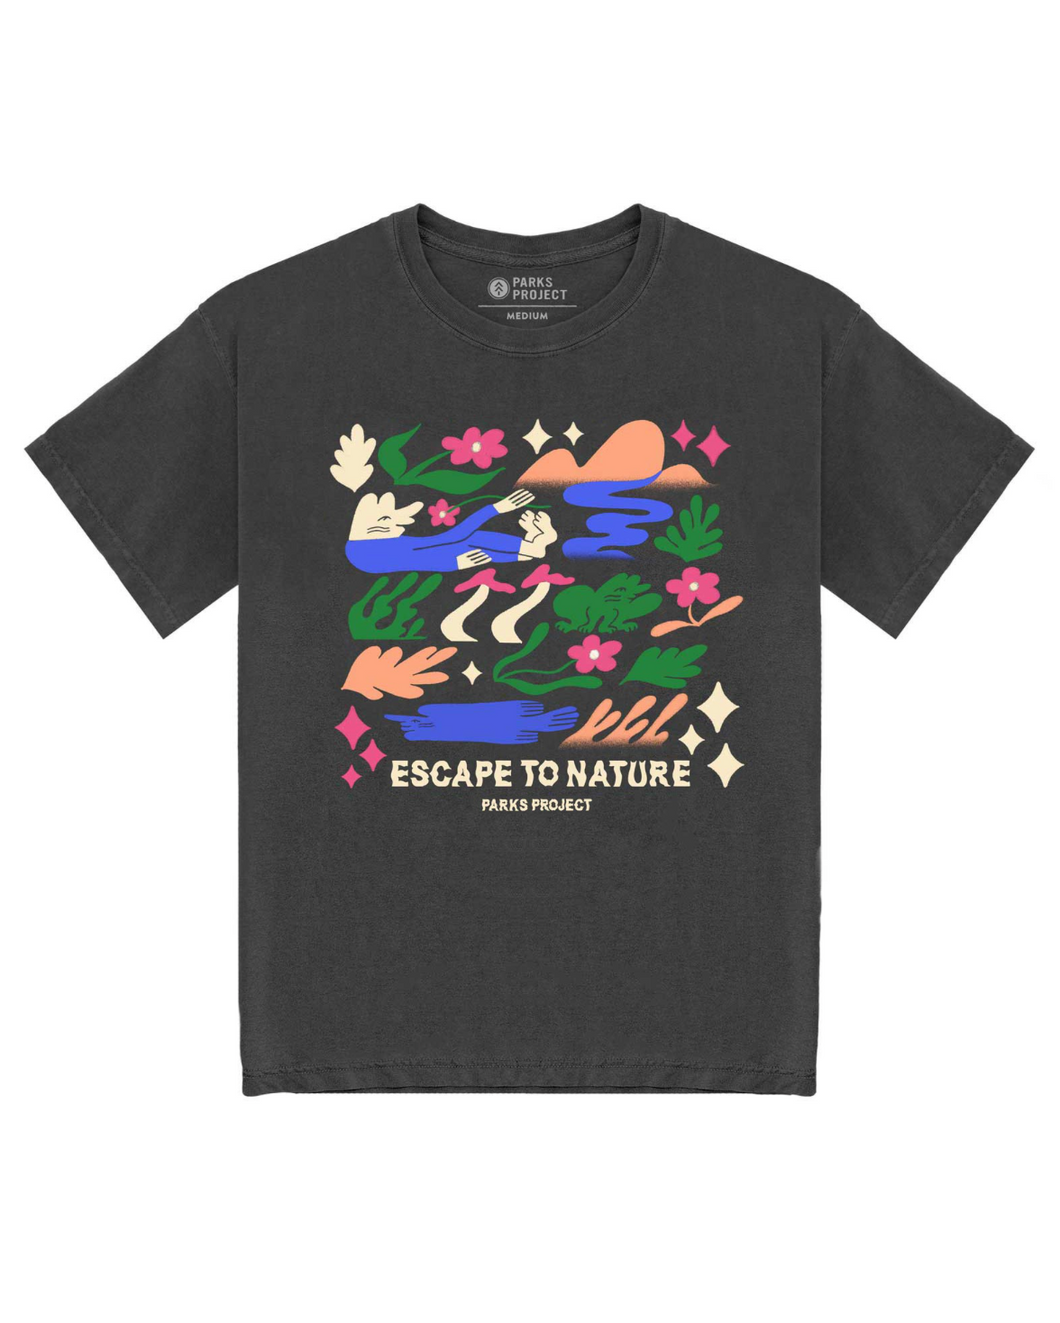 Escape to Nature Tee - Parks Project